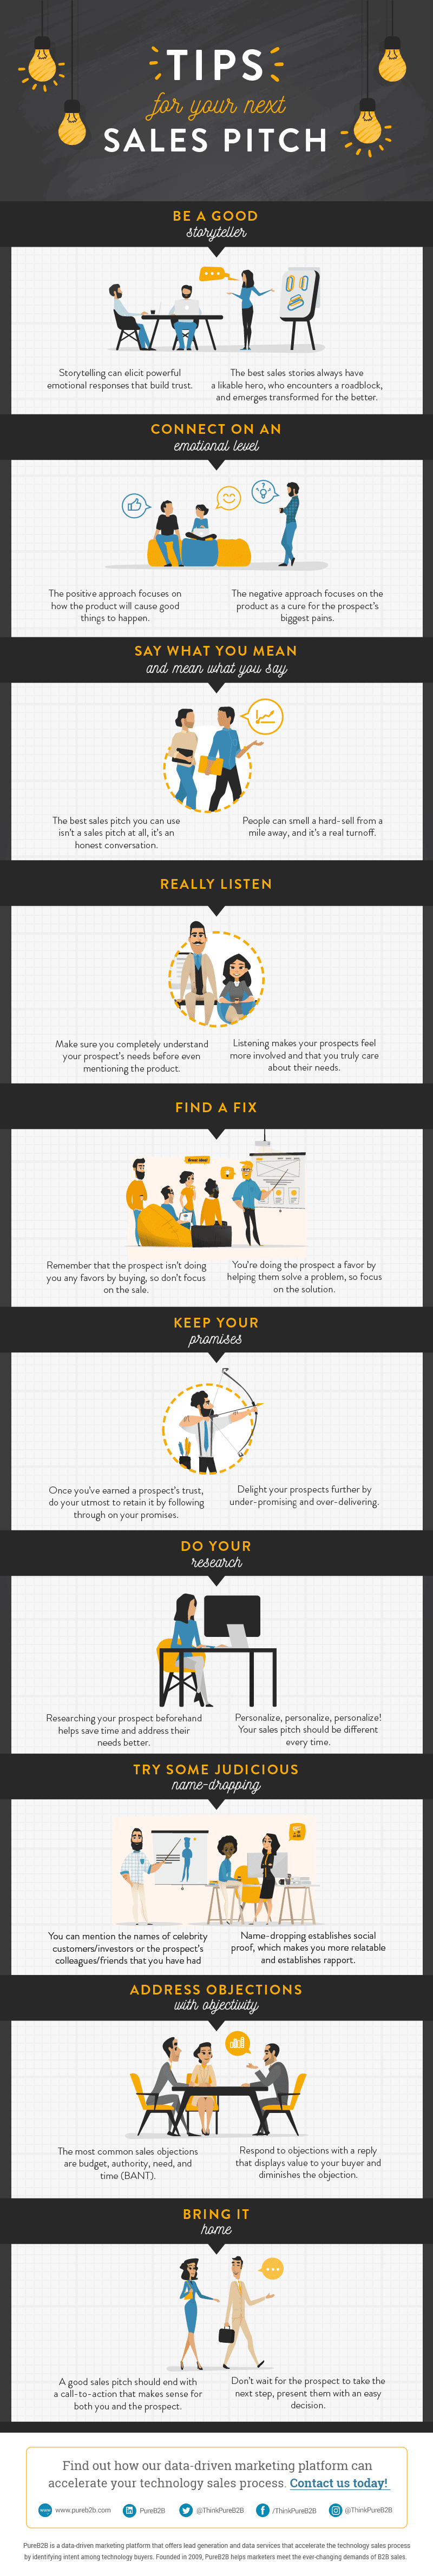 Infographic - Sales Pitch Tips